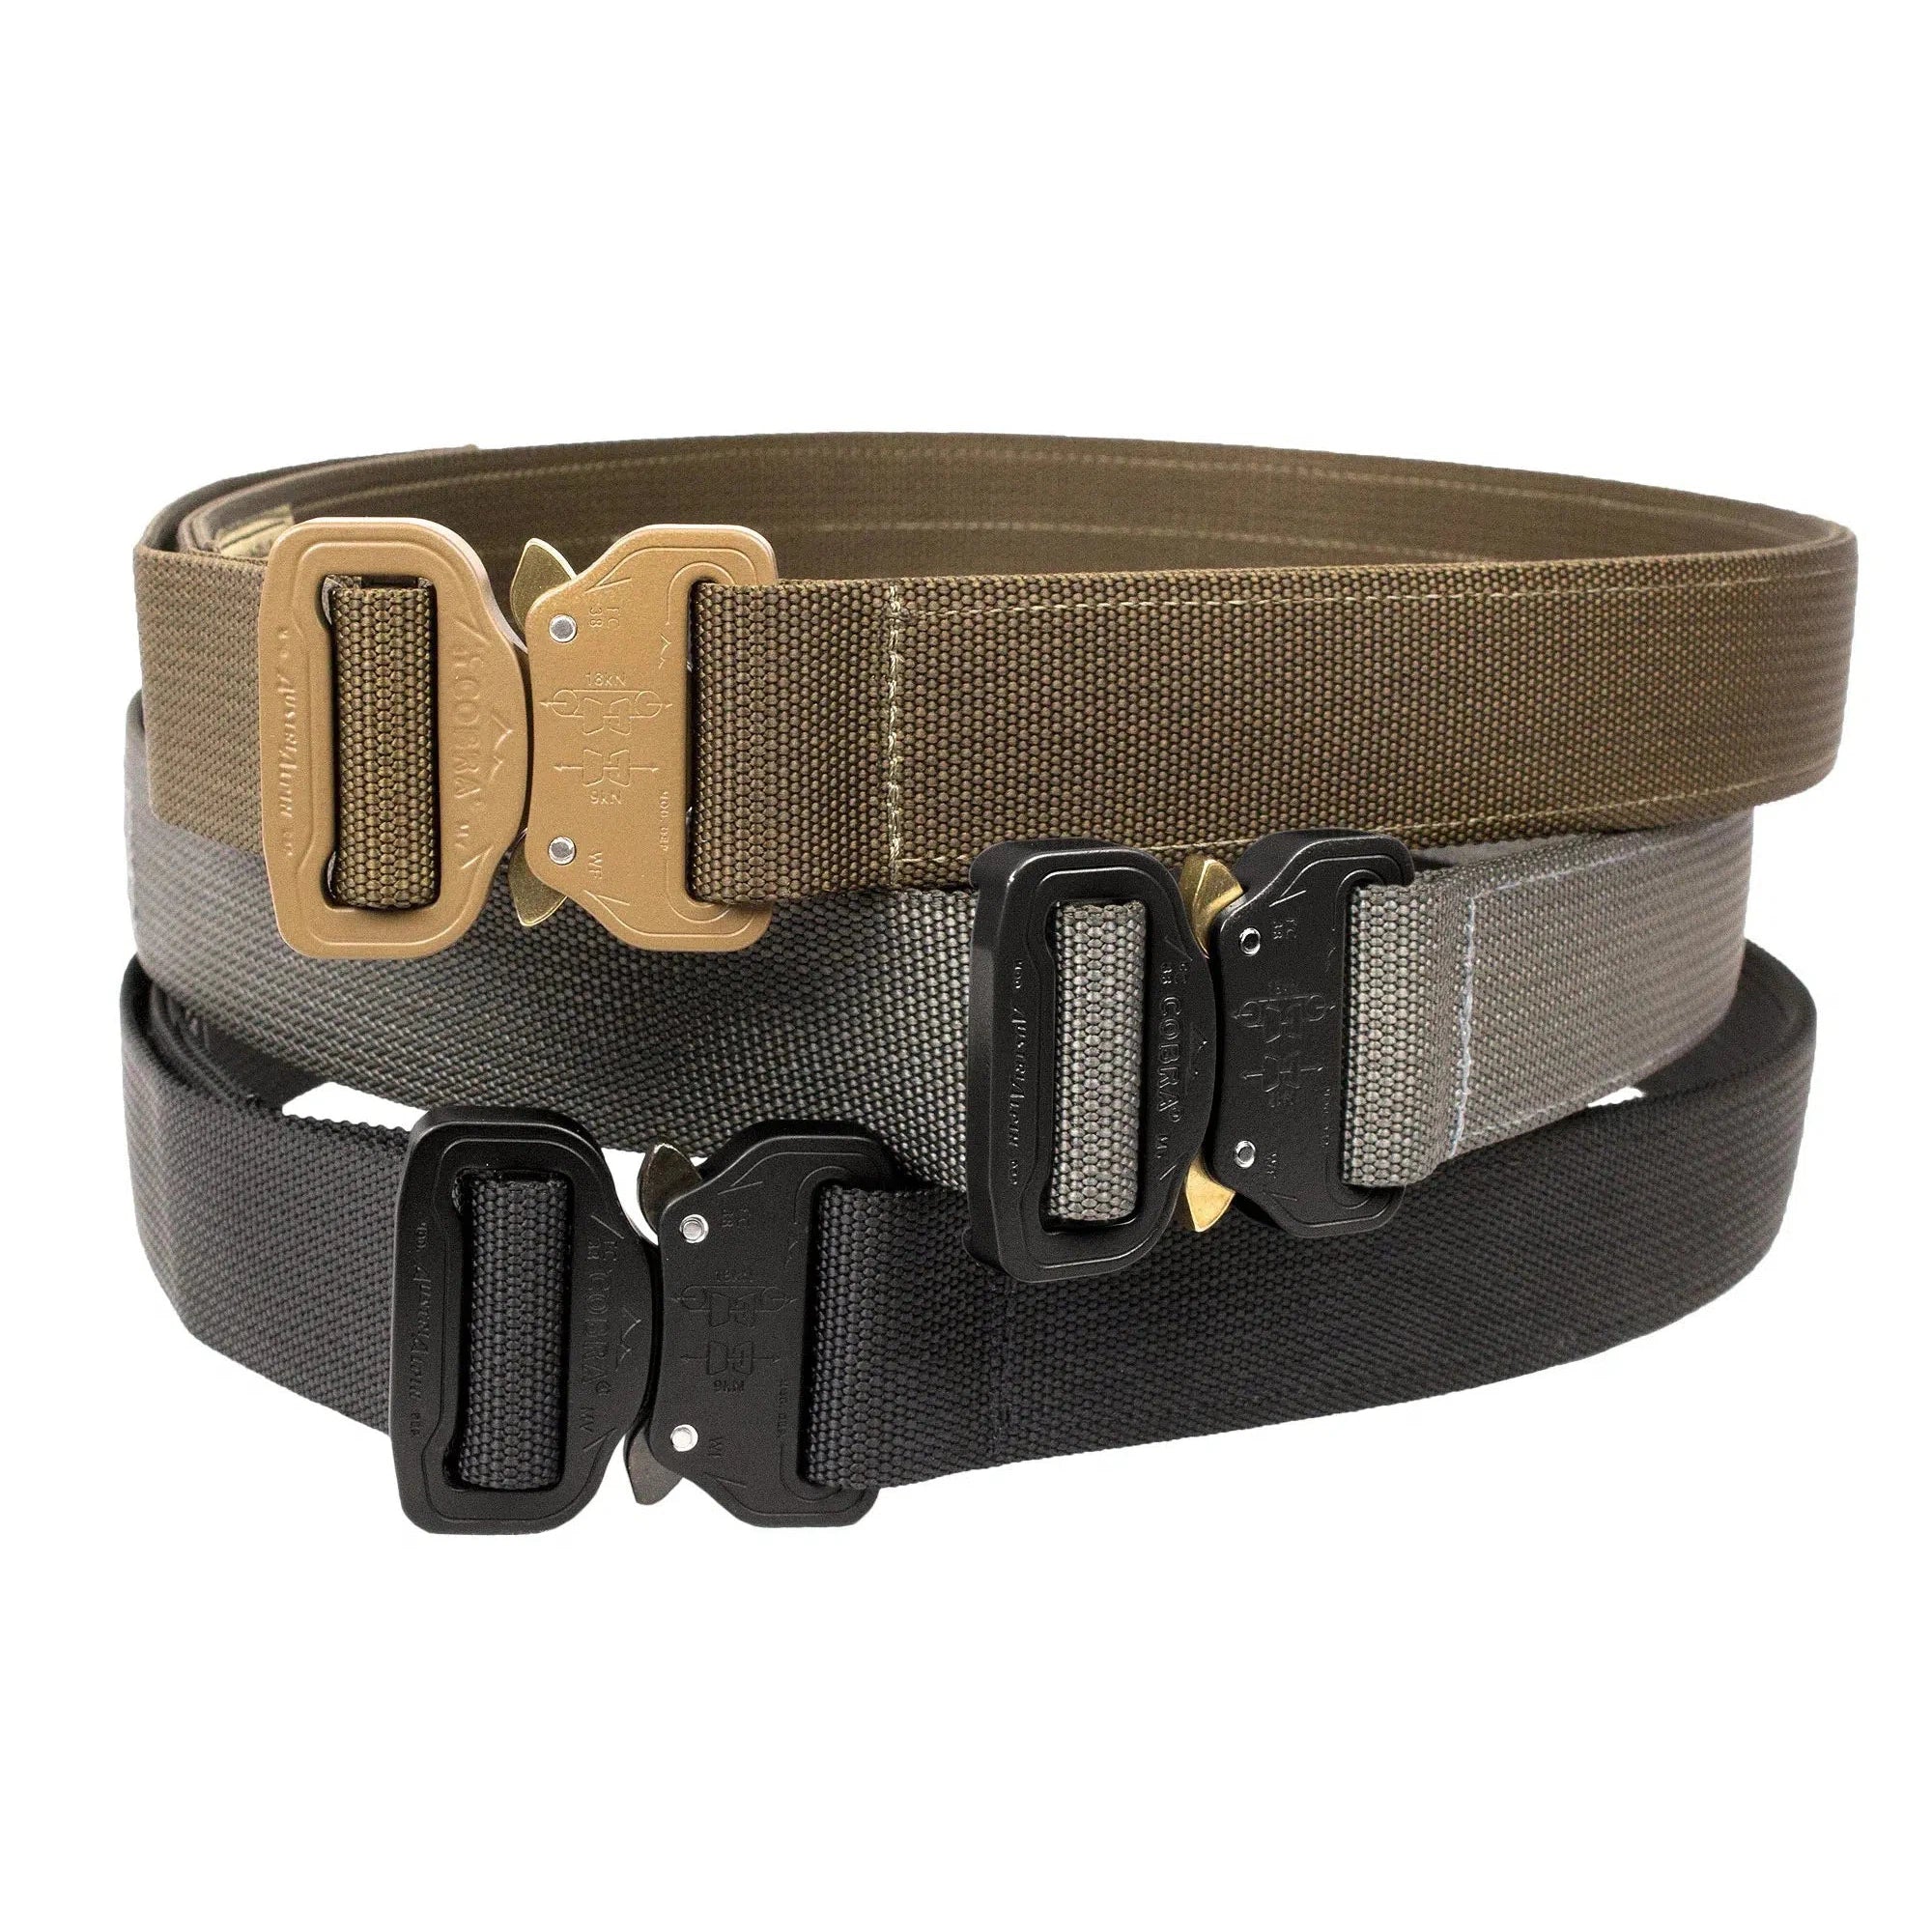 Elite Survival Systems Co Shooters Belt with Cobra Buckle